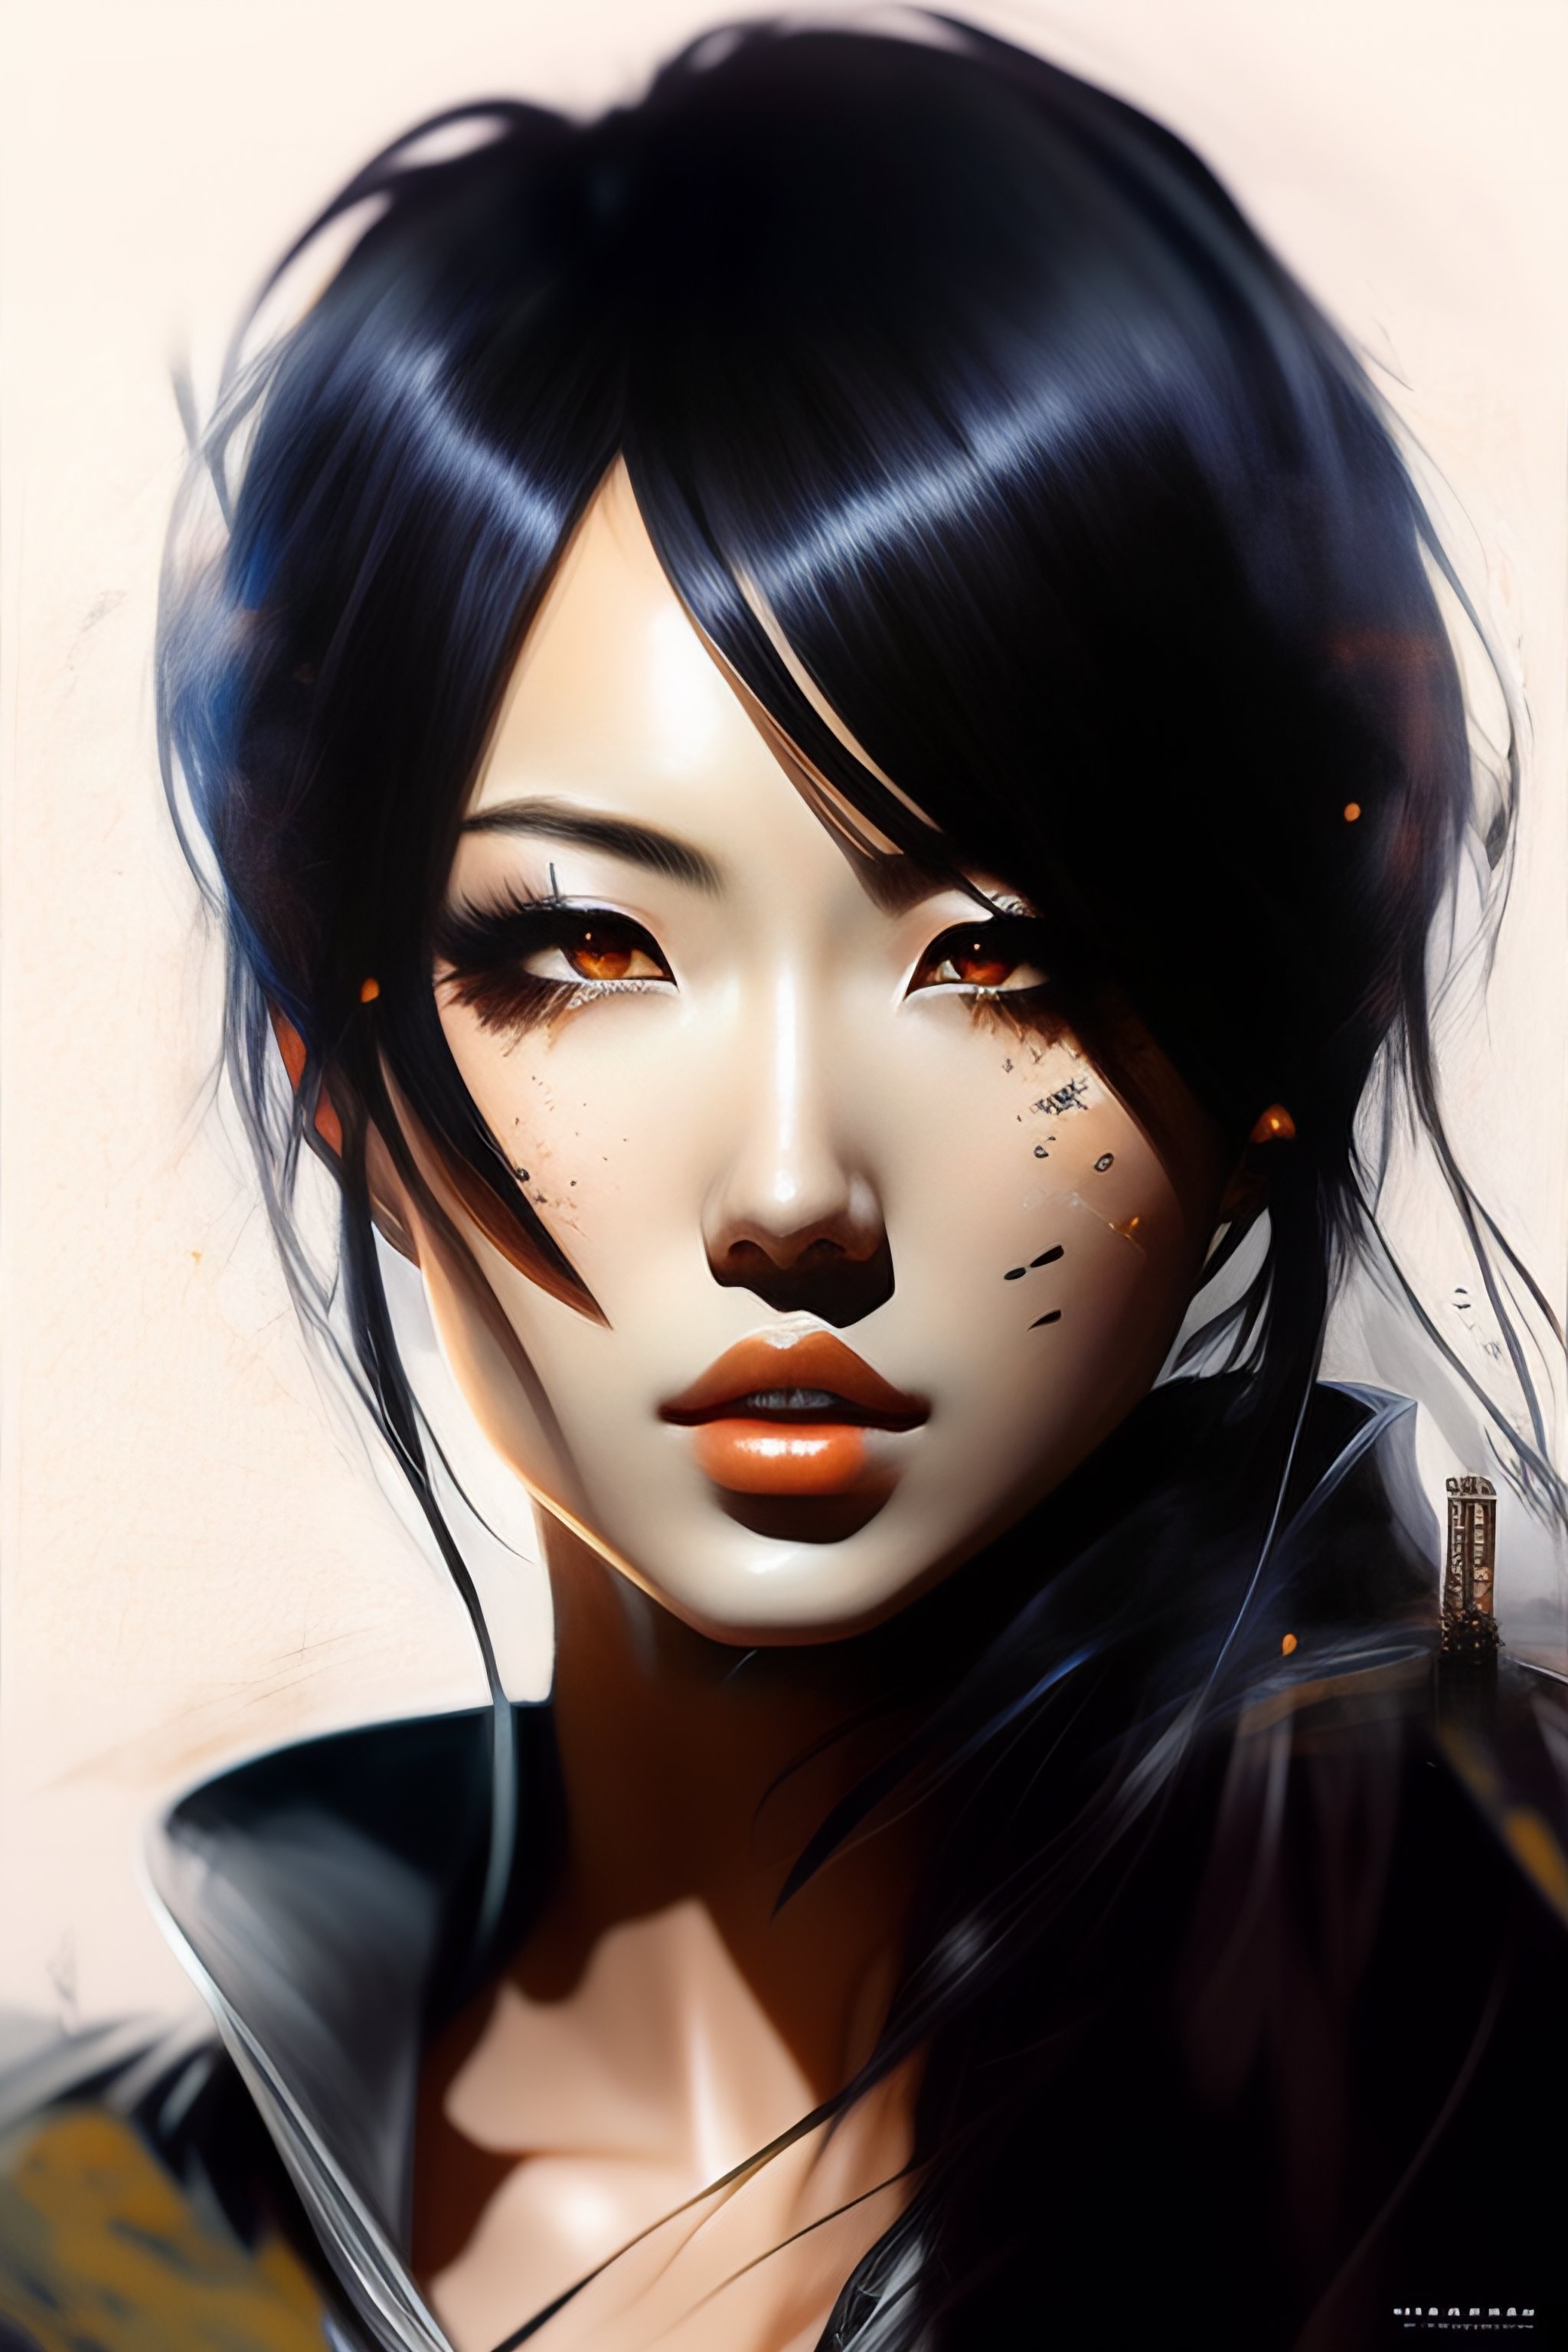 Lexica - Portrait of an anime character hyper realistic, by russ mills